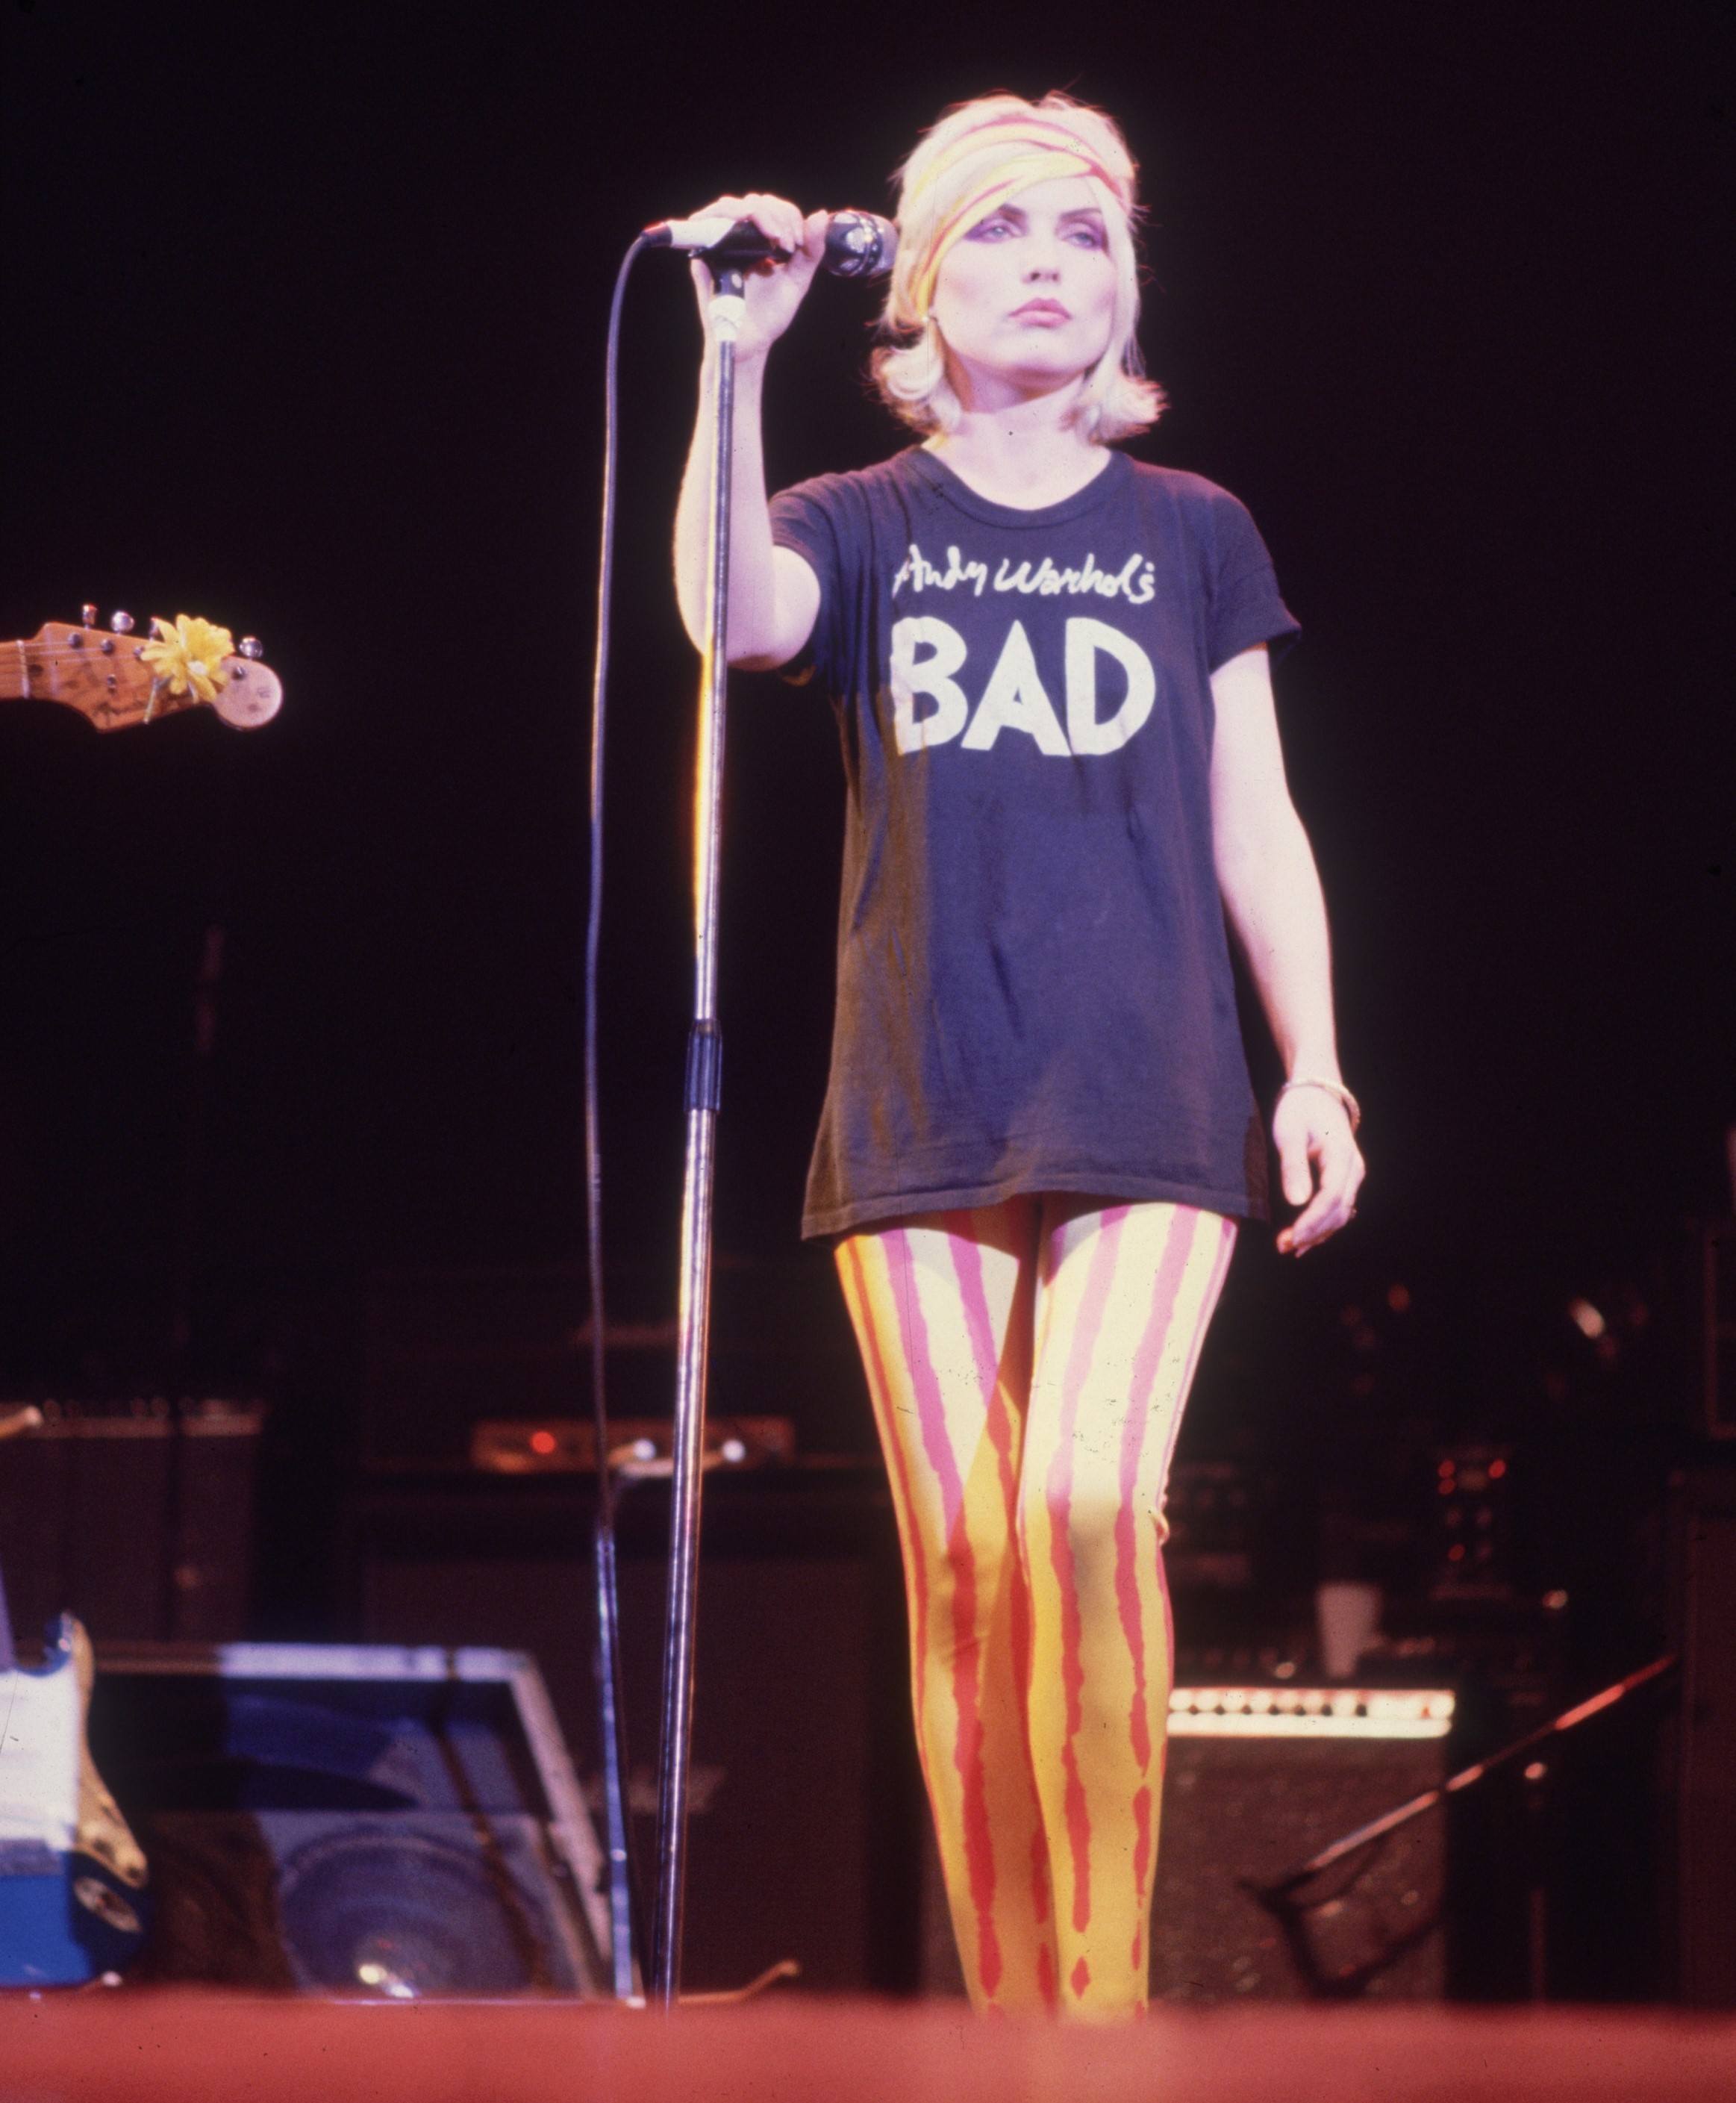 Debbie Harry, the American model and lead singer of the new wave band, Blondie, on stage.